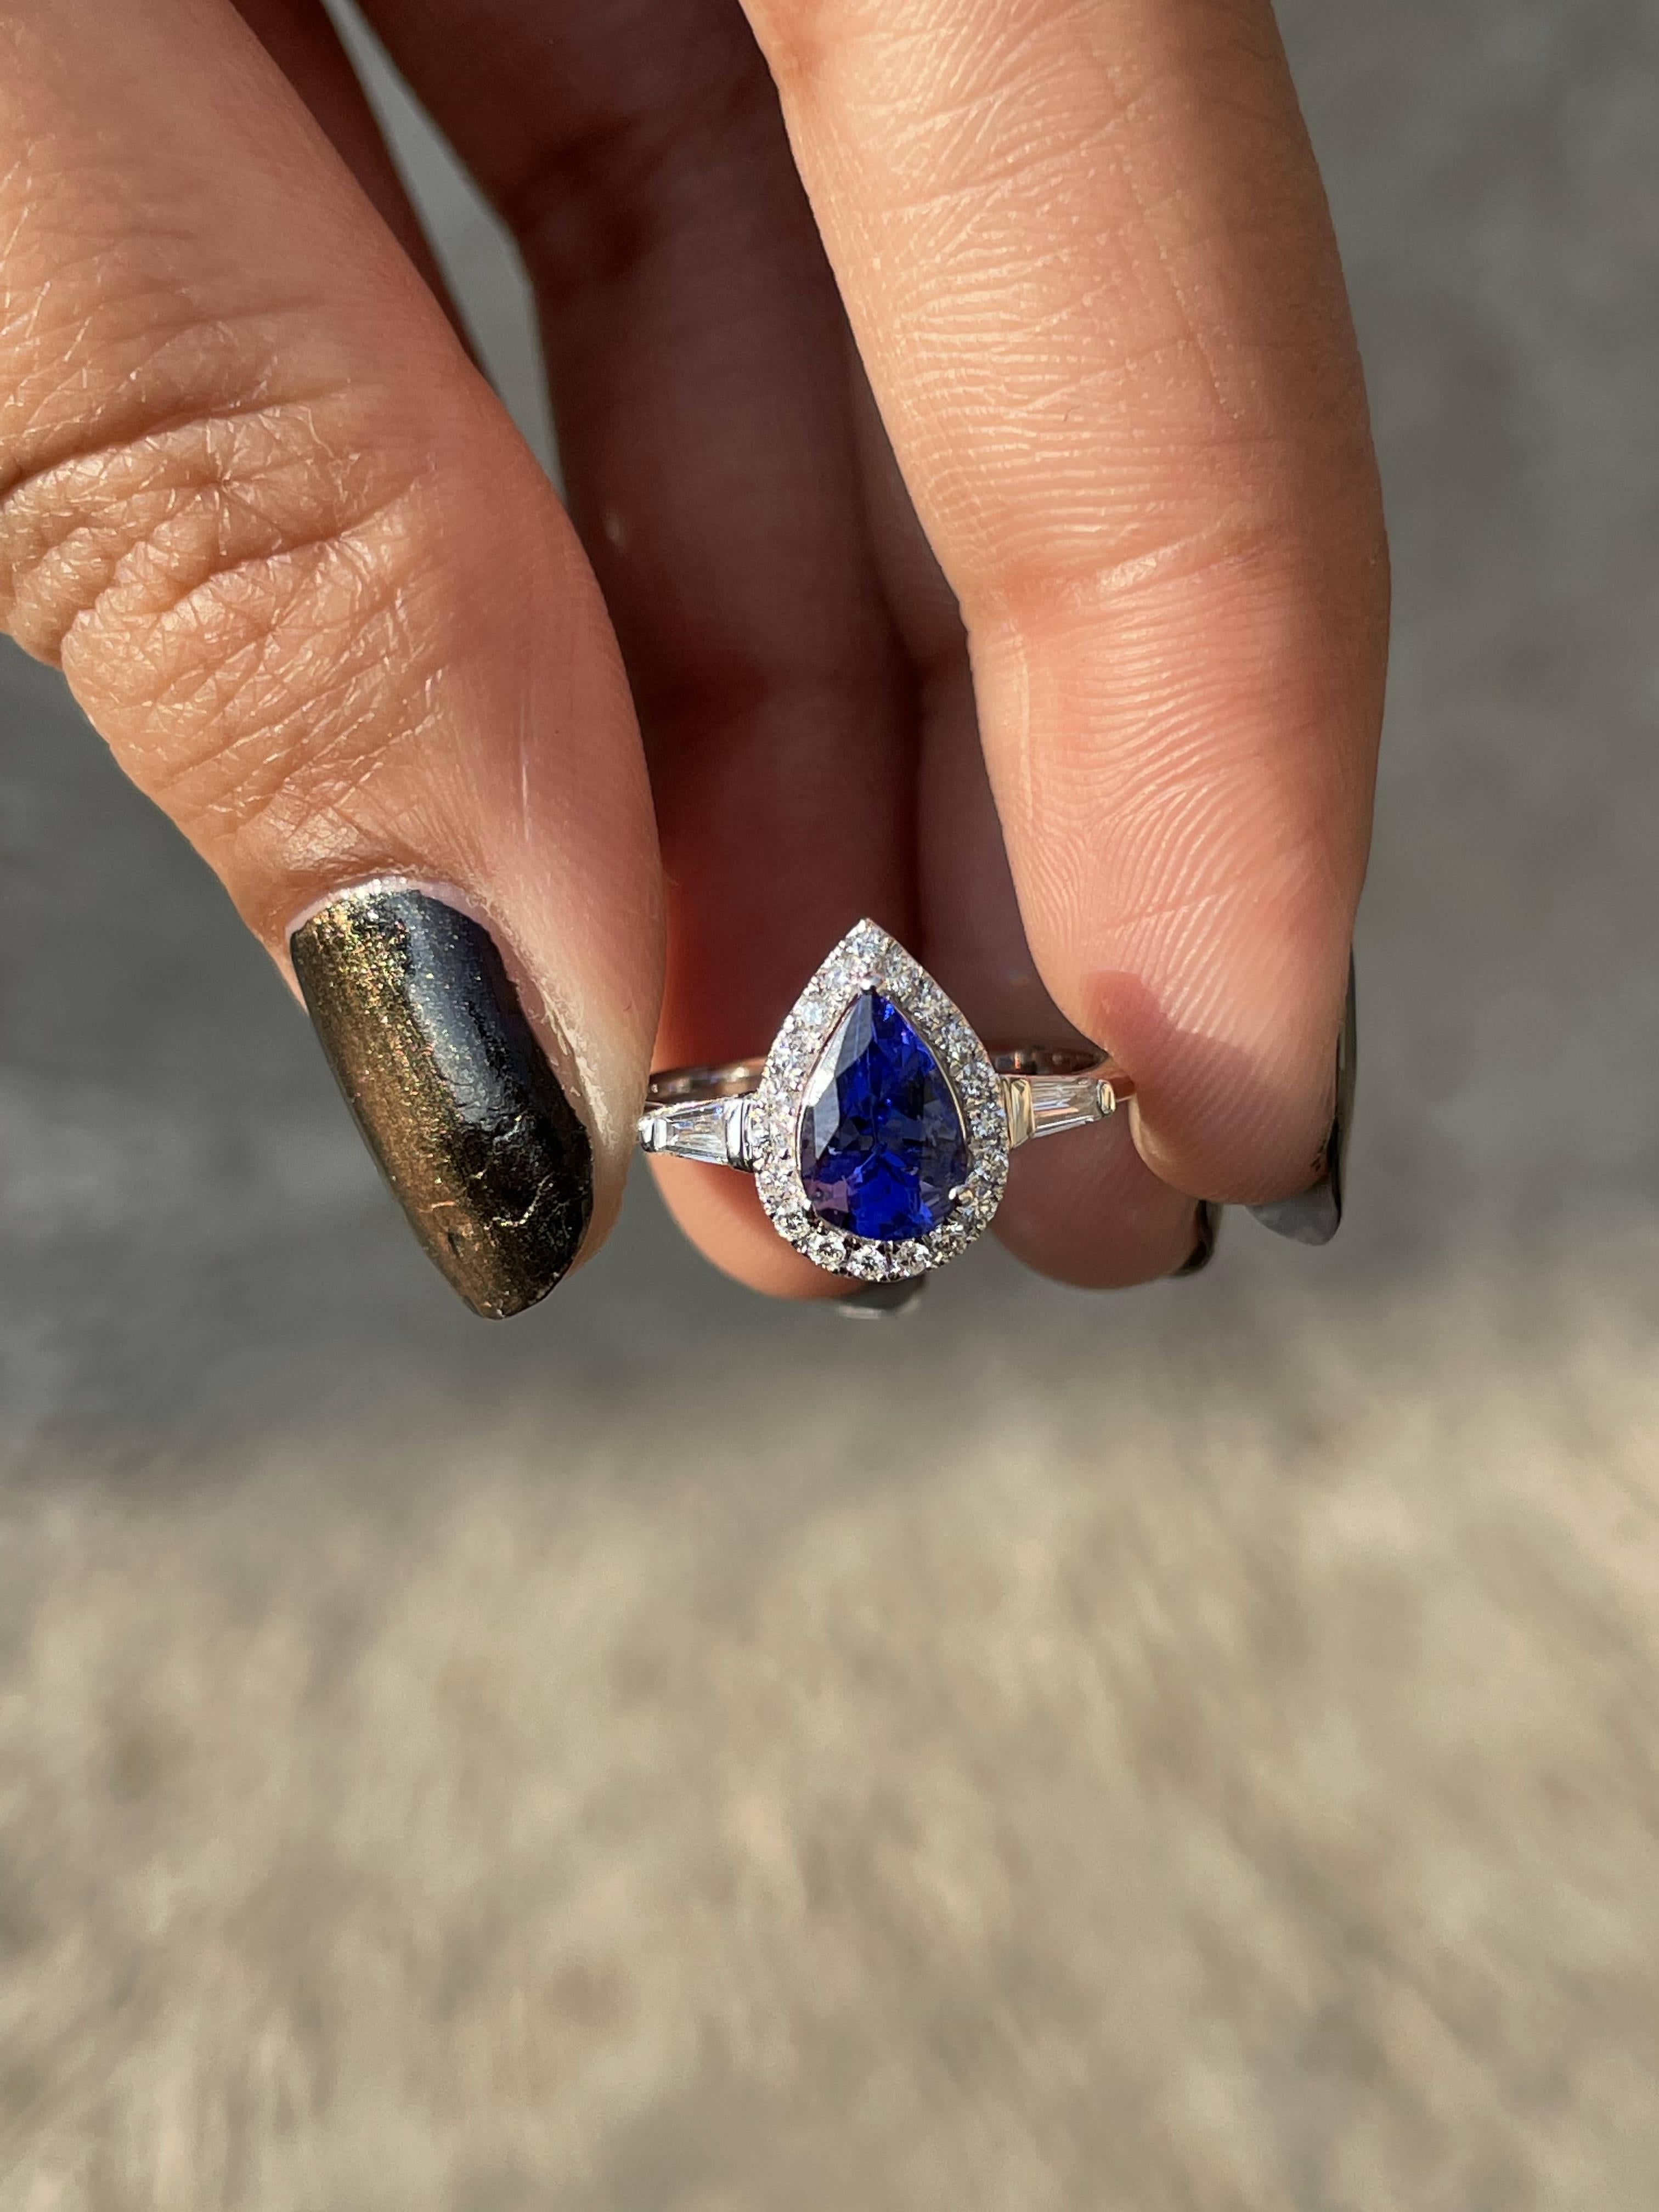 For Sale:  1.1 CTW Pear Shaped Tanzanite and Diamond Ring in 18k Solid White Gold 12